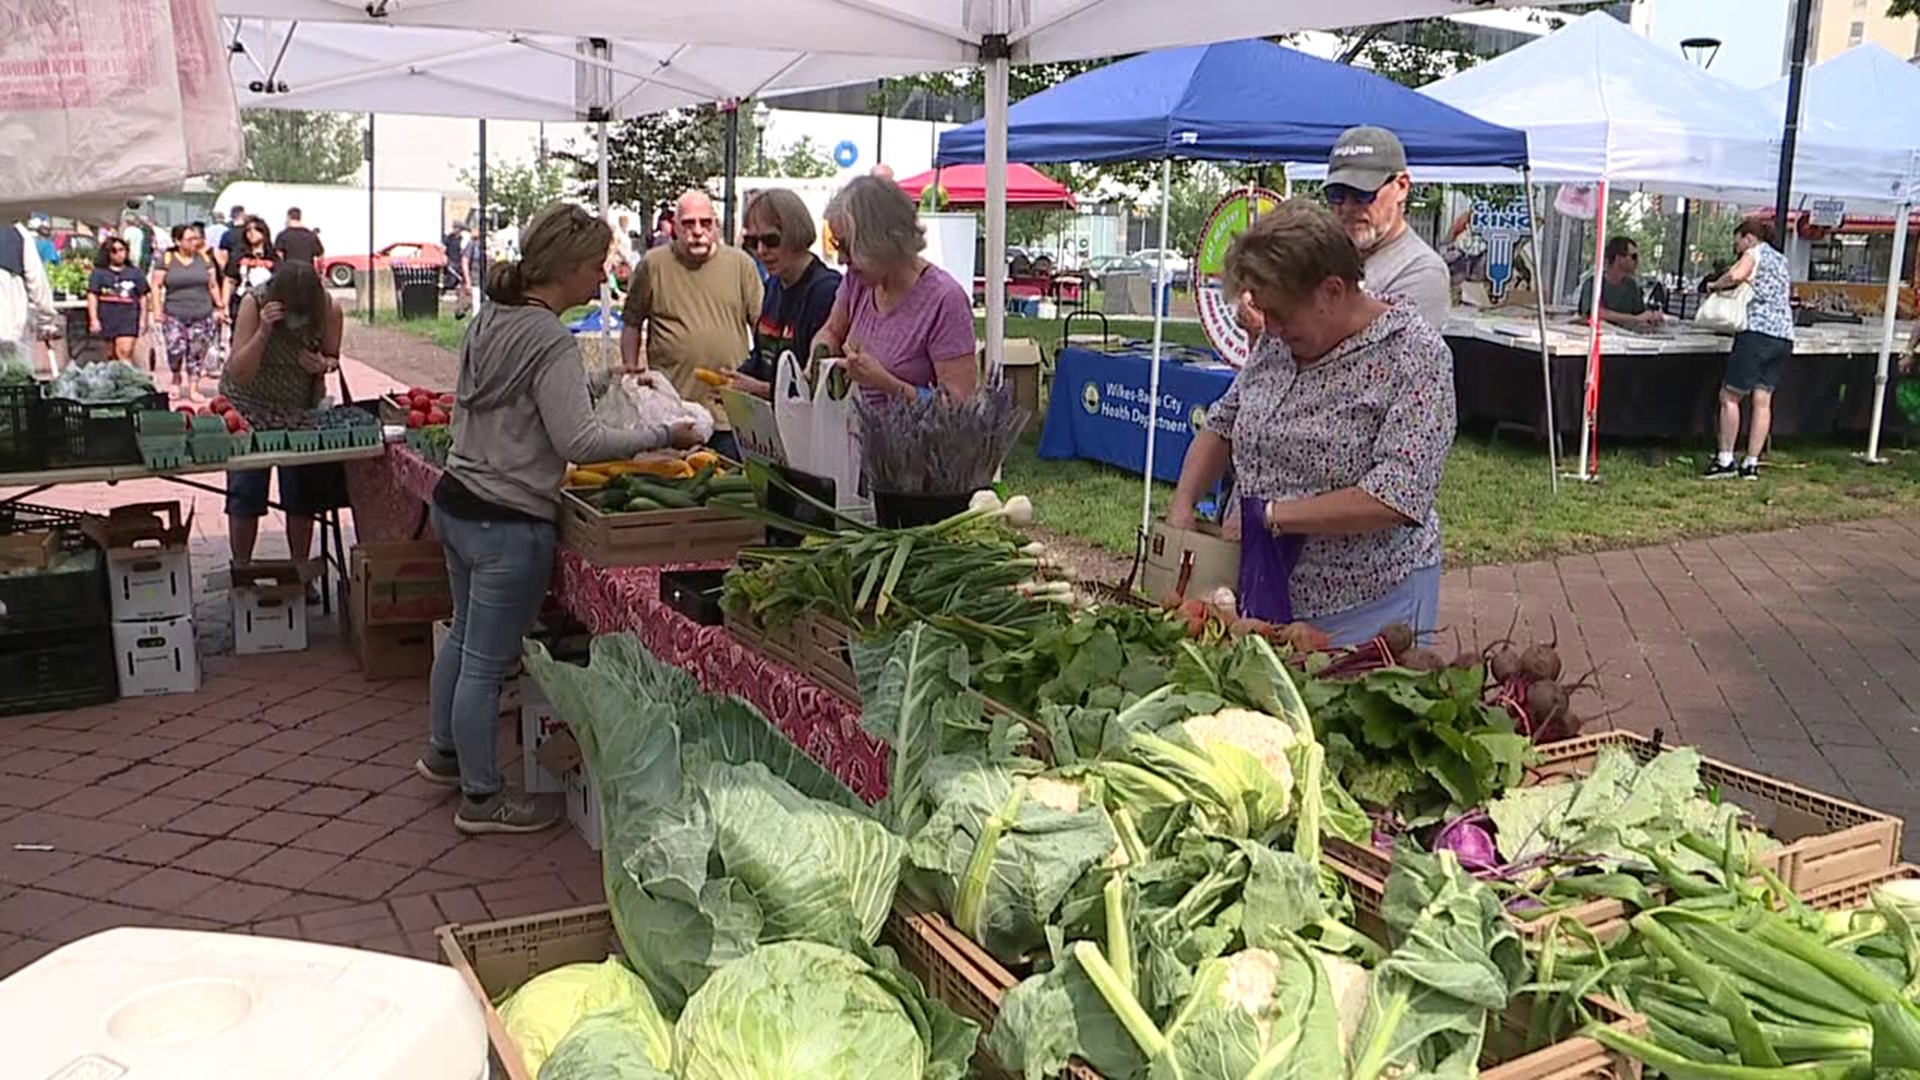 The Wilkes-Barre Farmers Market opened for the season Thursday in Public Square.